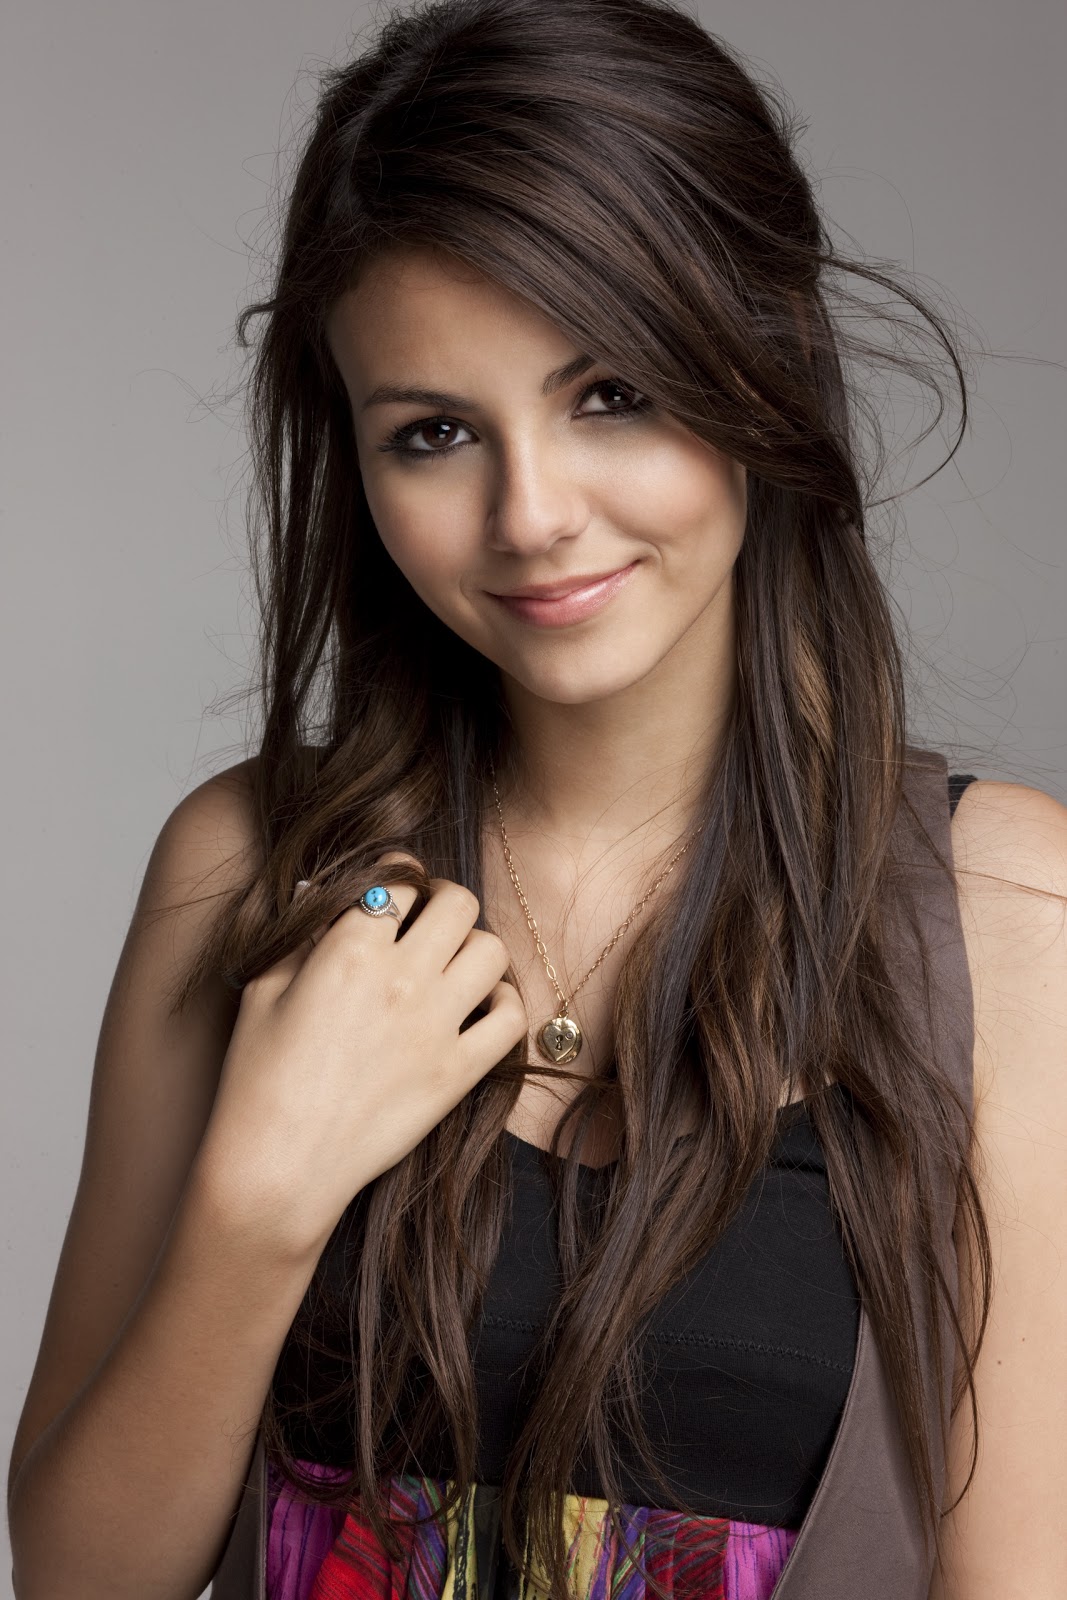 Young Style Model: Victoria Justice Biography